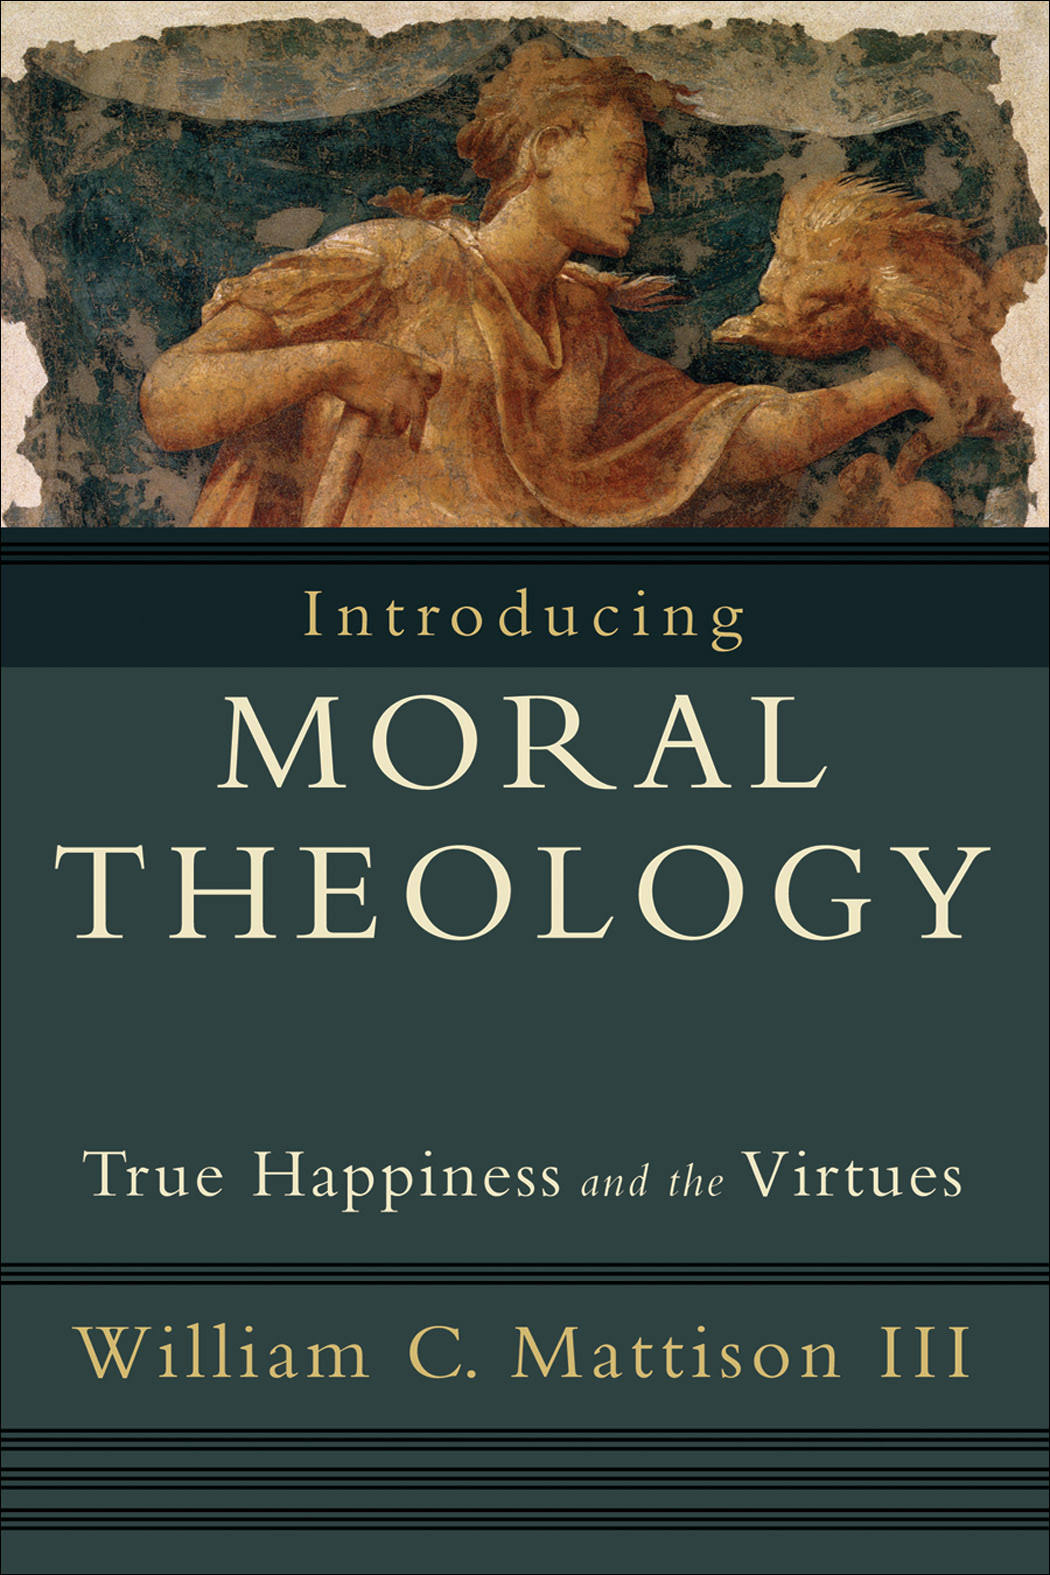 Introducing Moral Theology: True Happiness and the Virtues [Book]